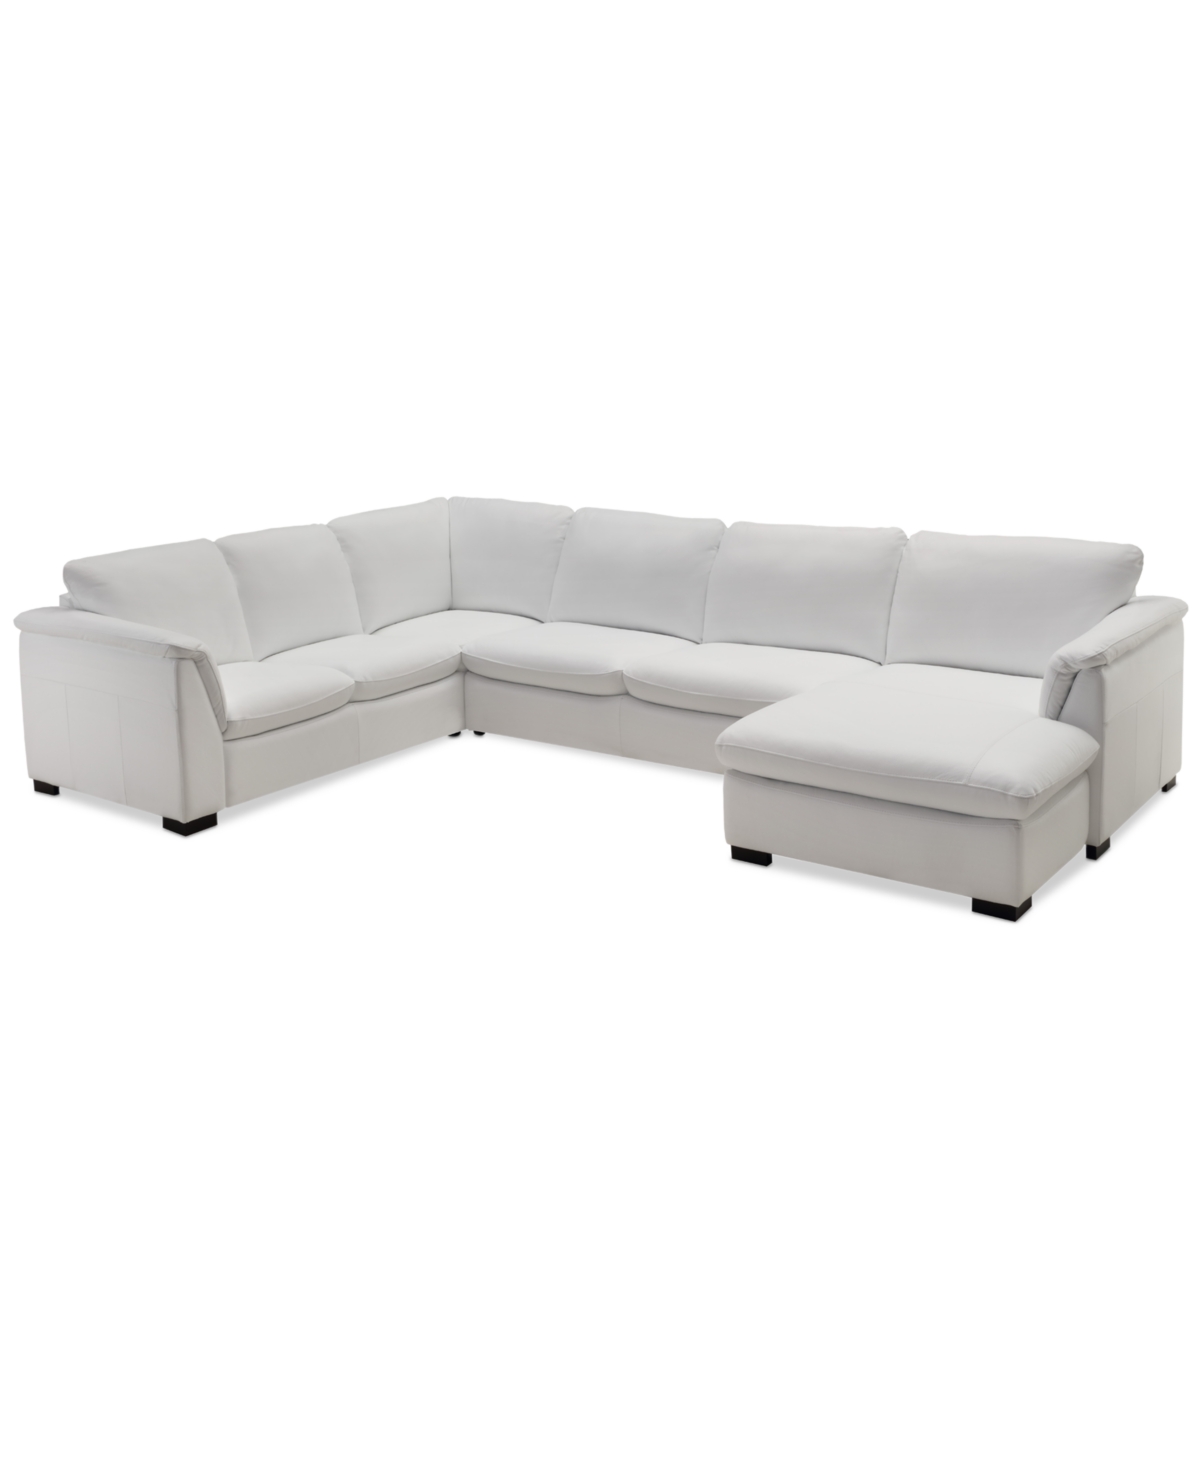 Furniture Arond 144" 3-pc. Leather Sectional With Chaise, Created For Macy's In Sand